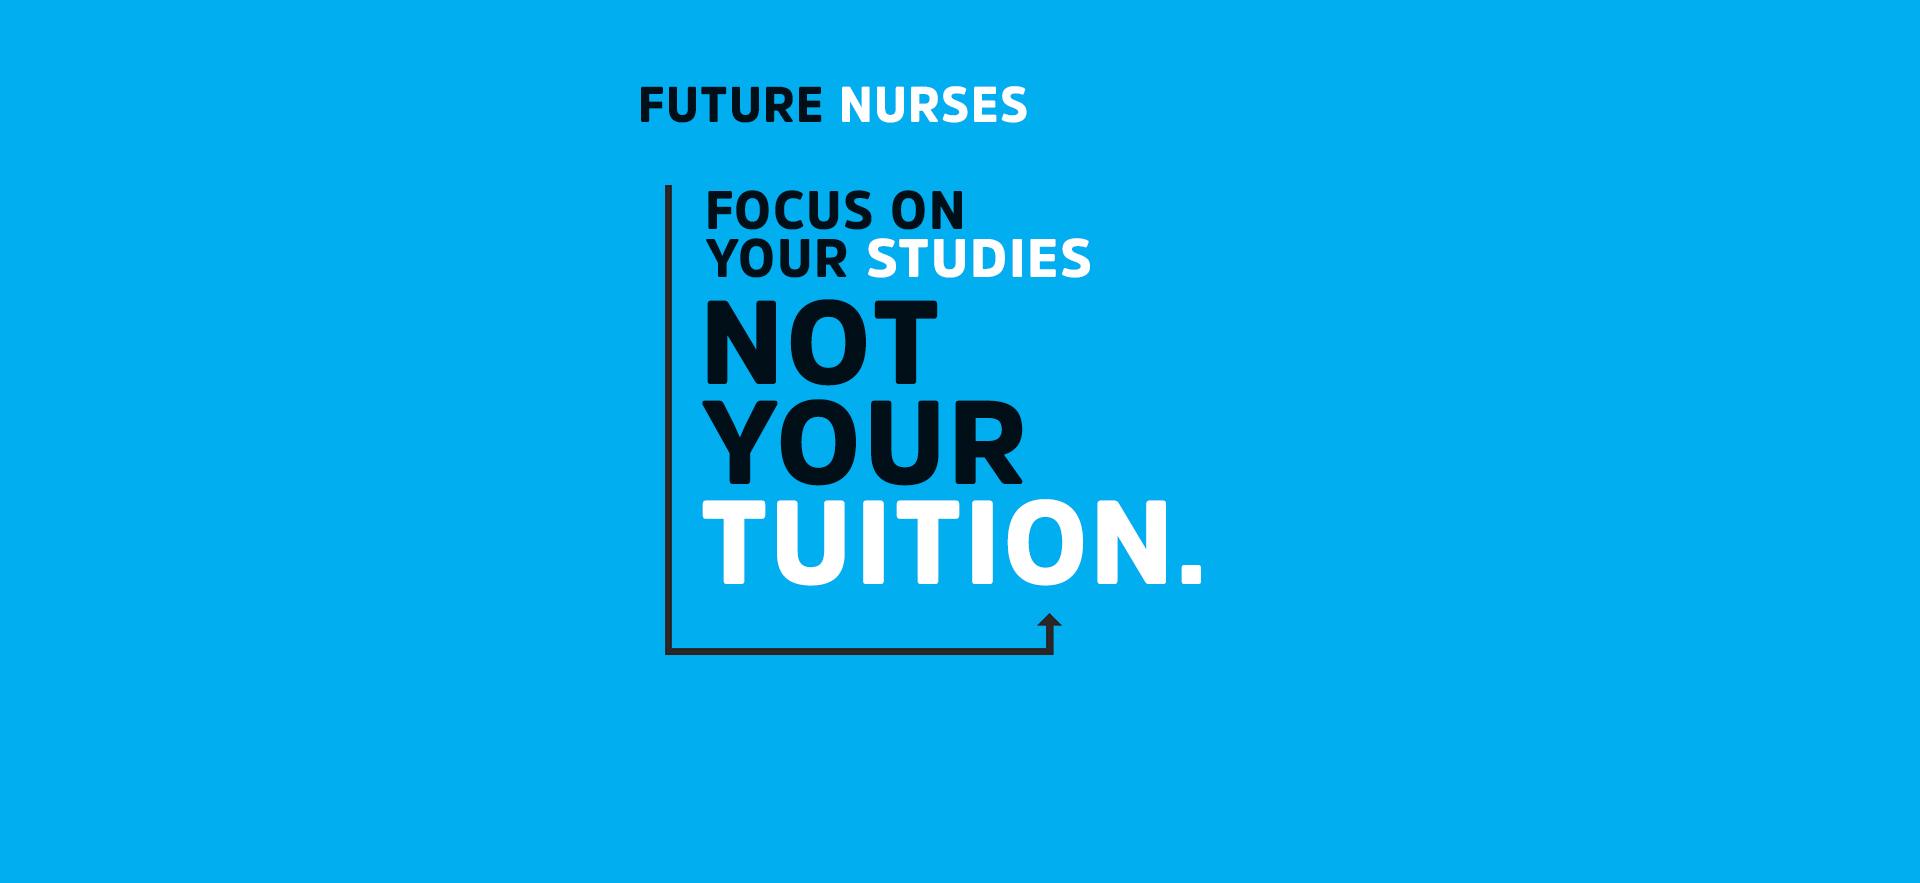 blue background with text "Future Nurses Focus on your studies, not your tuition." about the Ontario Learn and Stay Grant